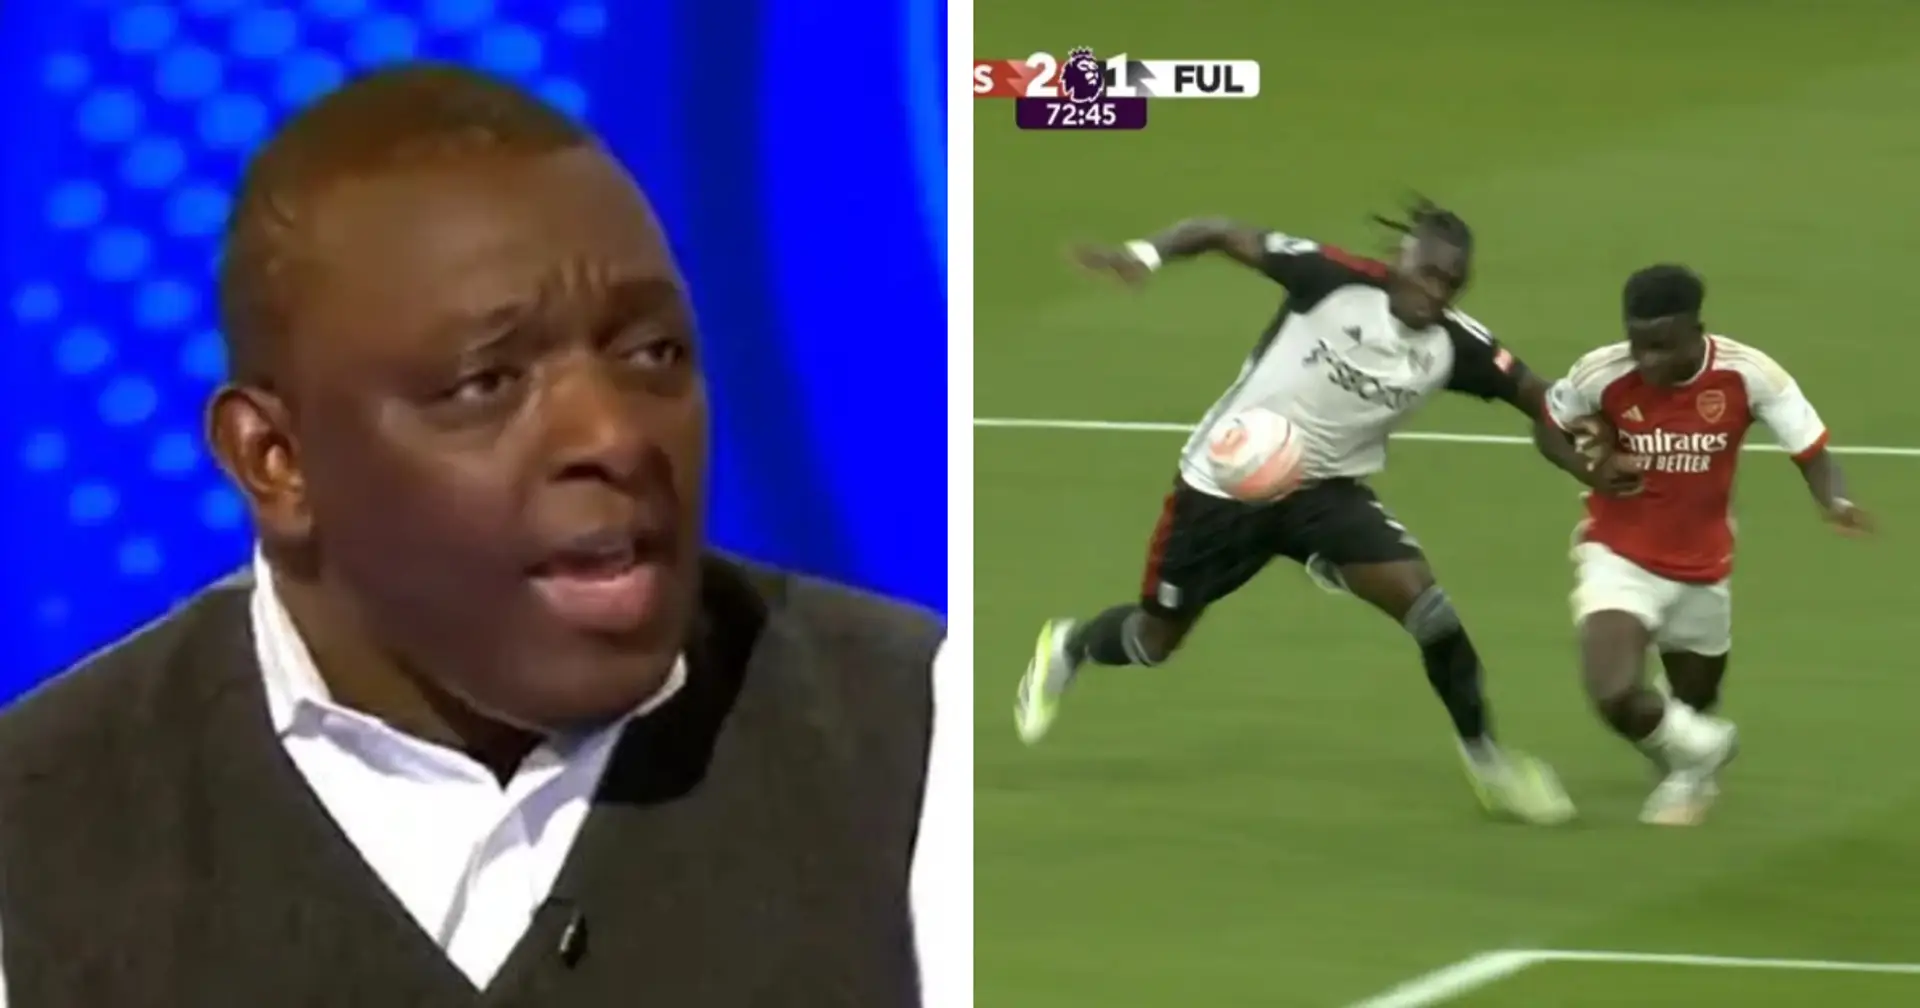 'Marco Silva was entitled to get animated': Garth Crooks believes Fulham would've beaten Arsenal if it wasn't for 'poor' refereeing